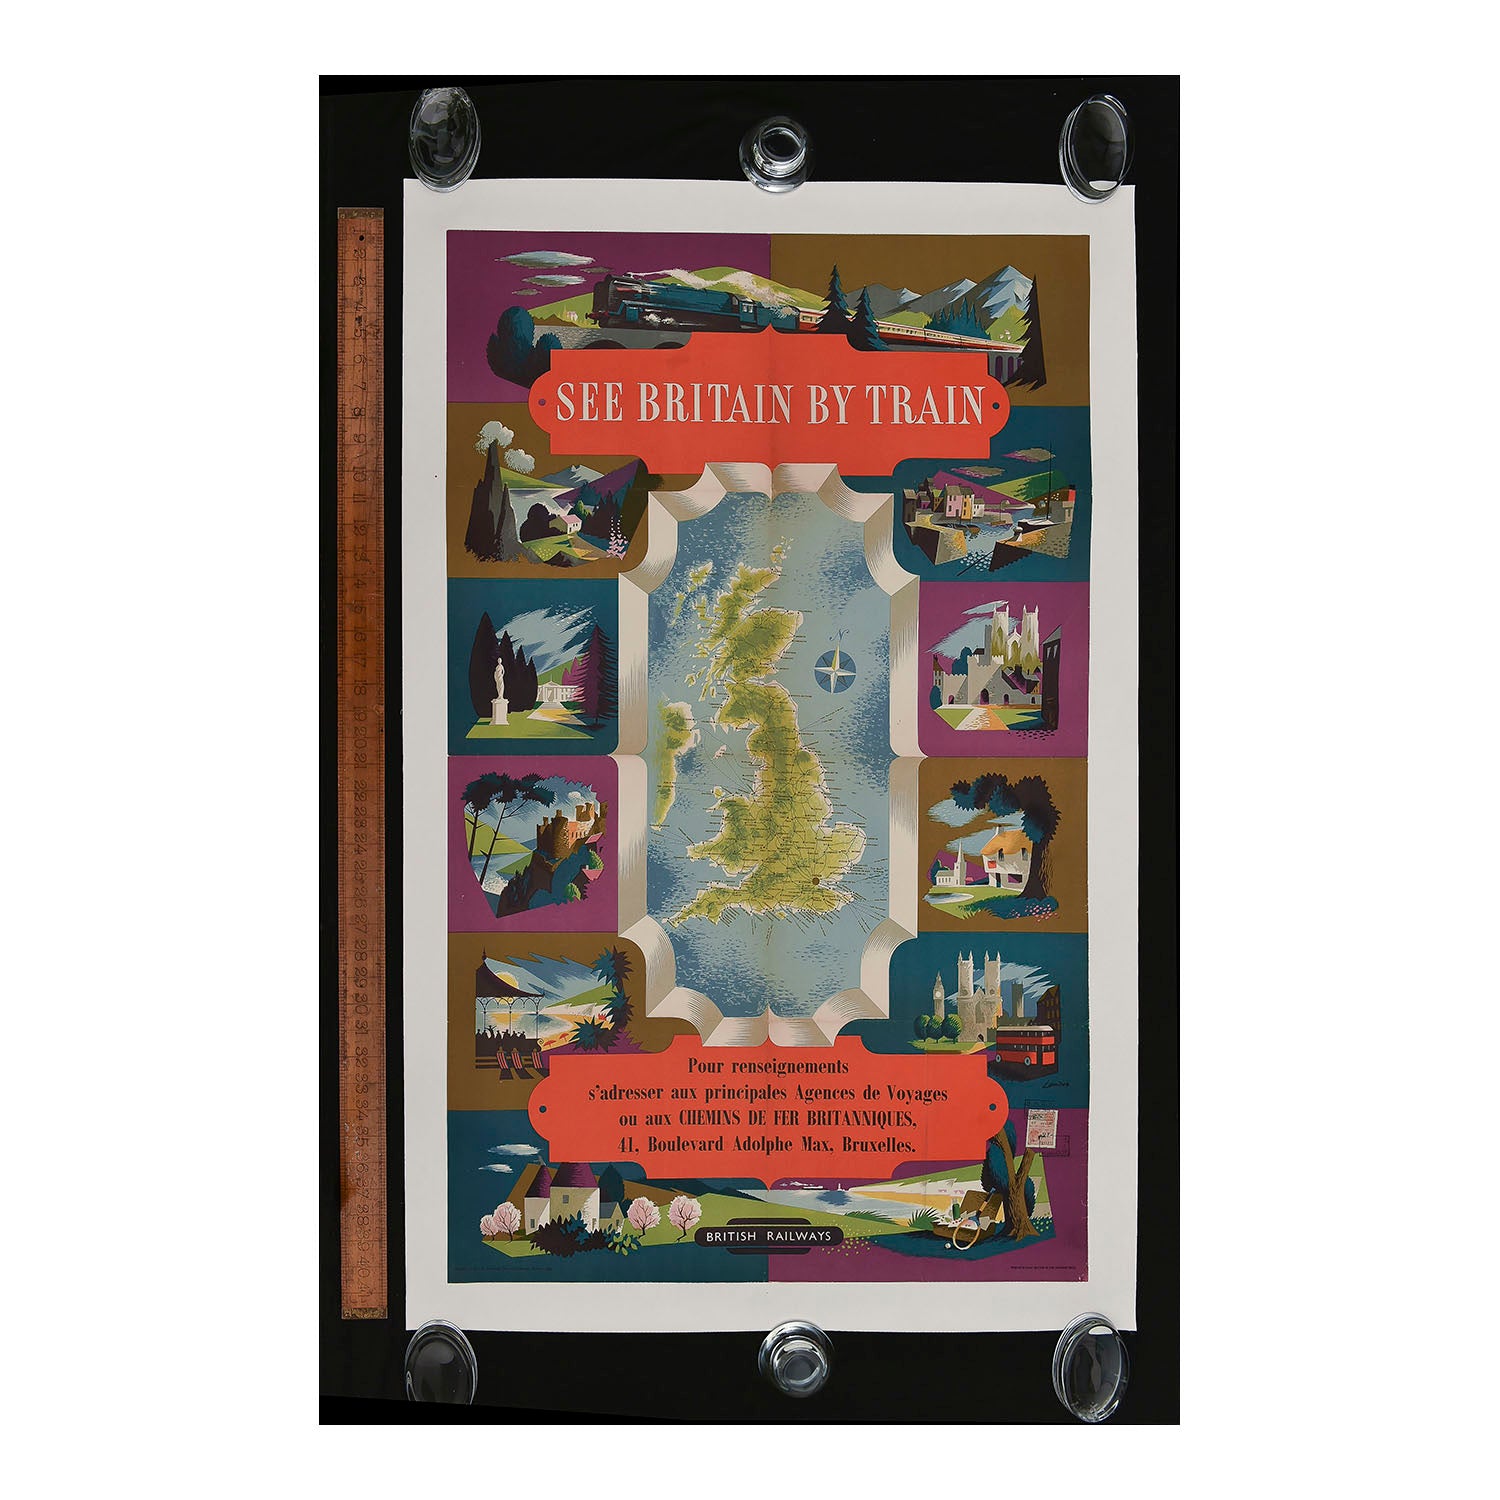 See Britain by Train – an original vintage poster map commissioned by British Railways and designed by Reginald Lander, 1955. The poster, which was printed for the French/Belgian tourist market, includes several charming vignettes of places to see including London, the Lake District, the Scottish Highlands, Kentish Oast Houses and a typical seaside scene